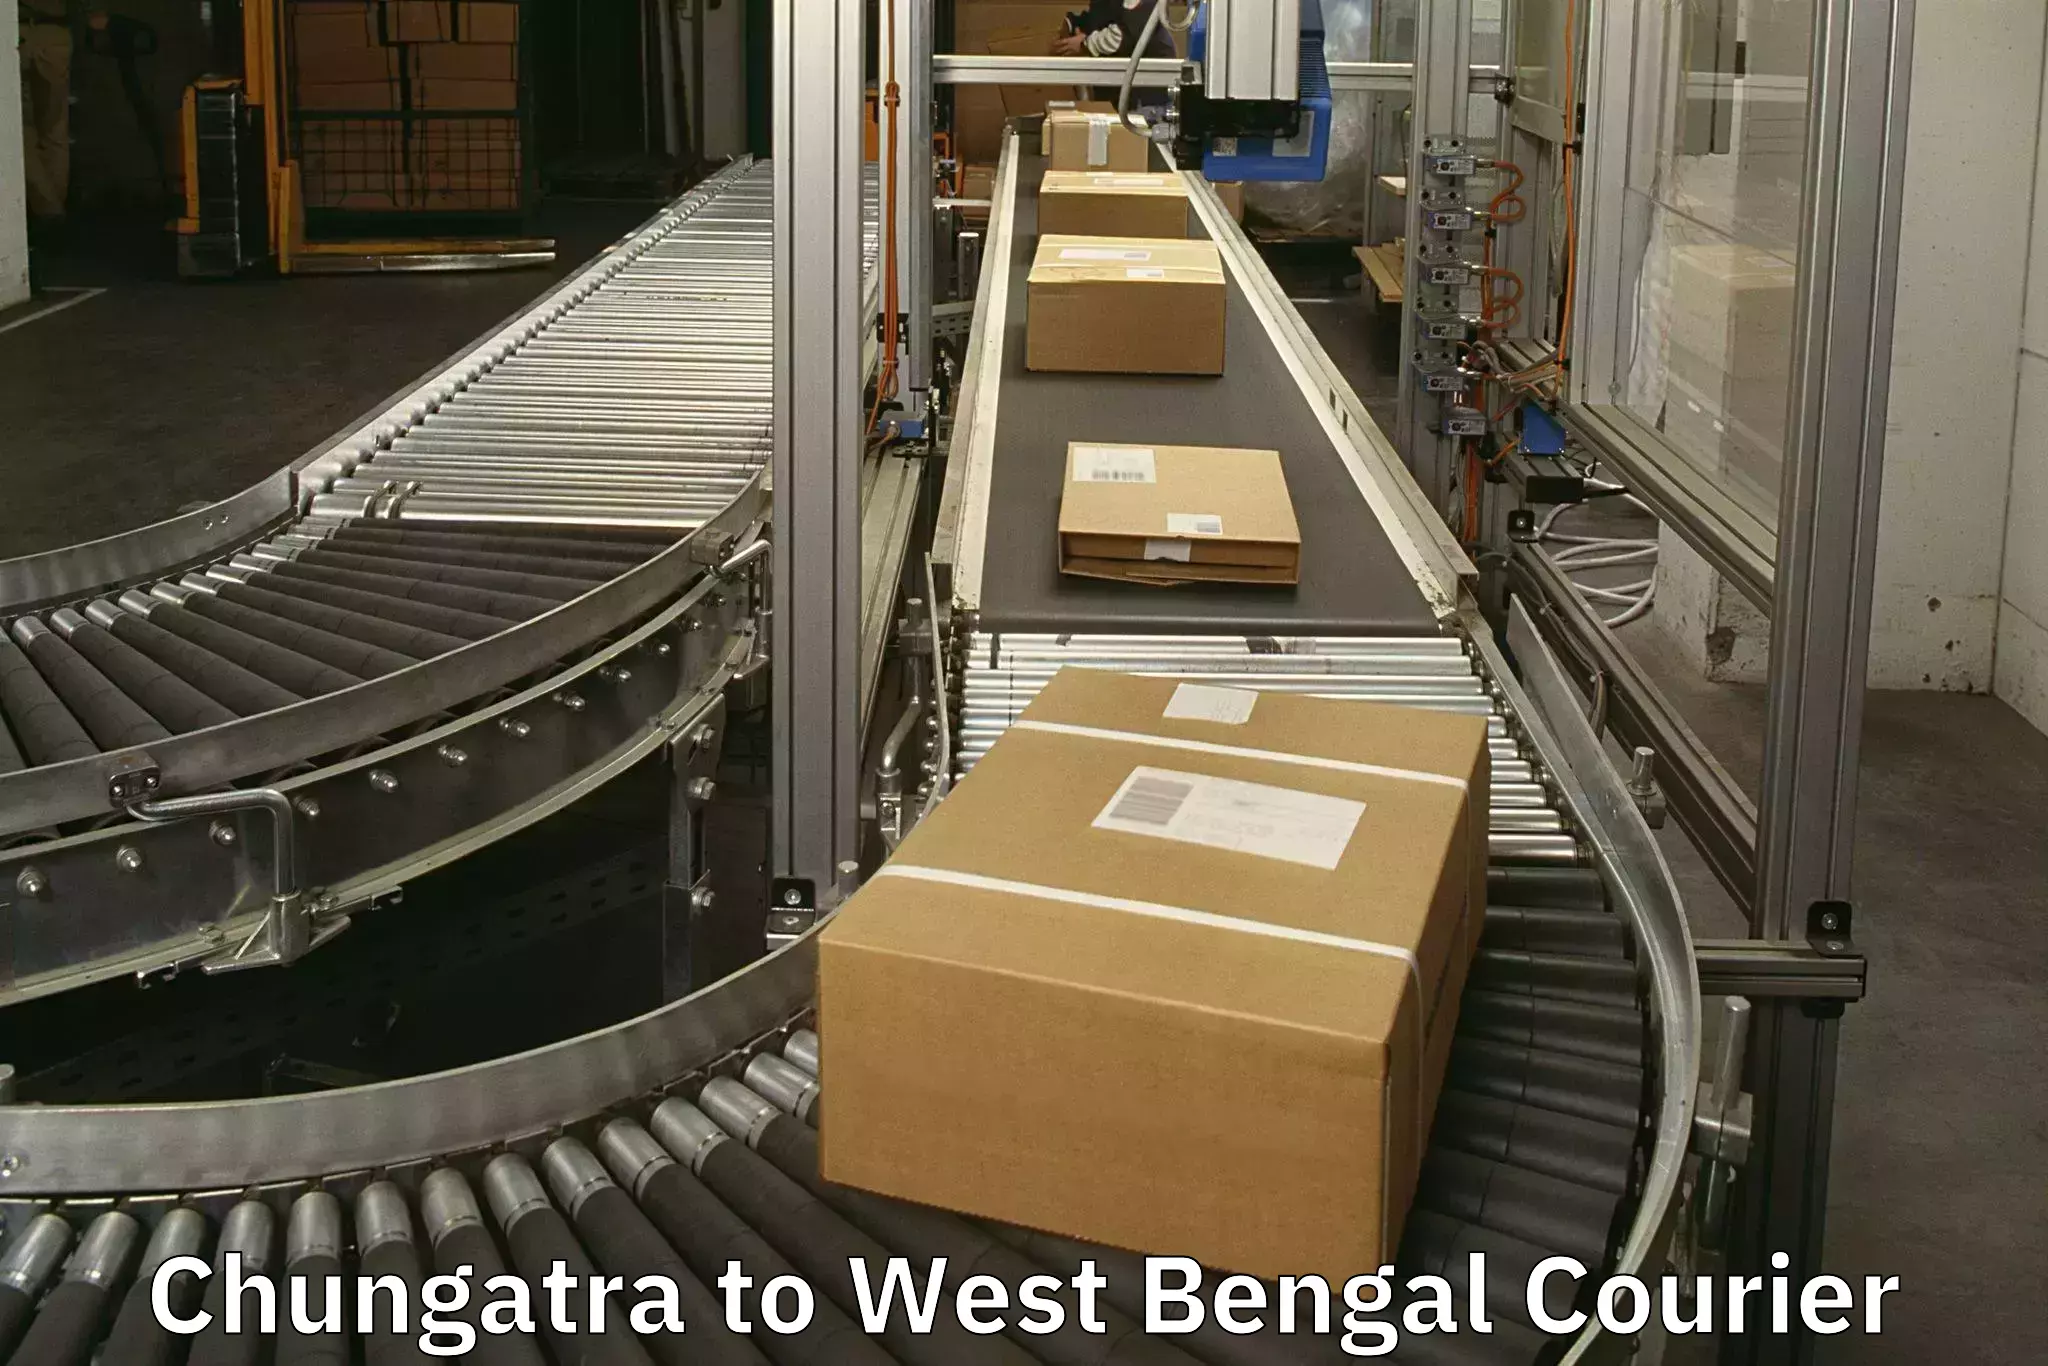 Luggage transport deals Chungatra to West Bengal